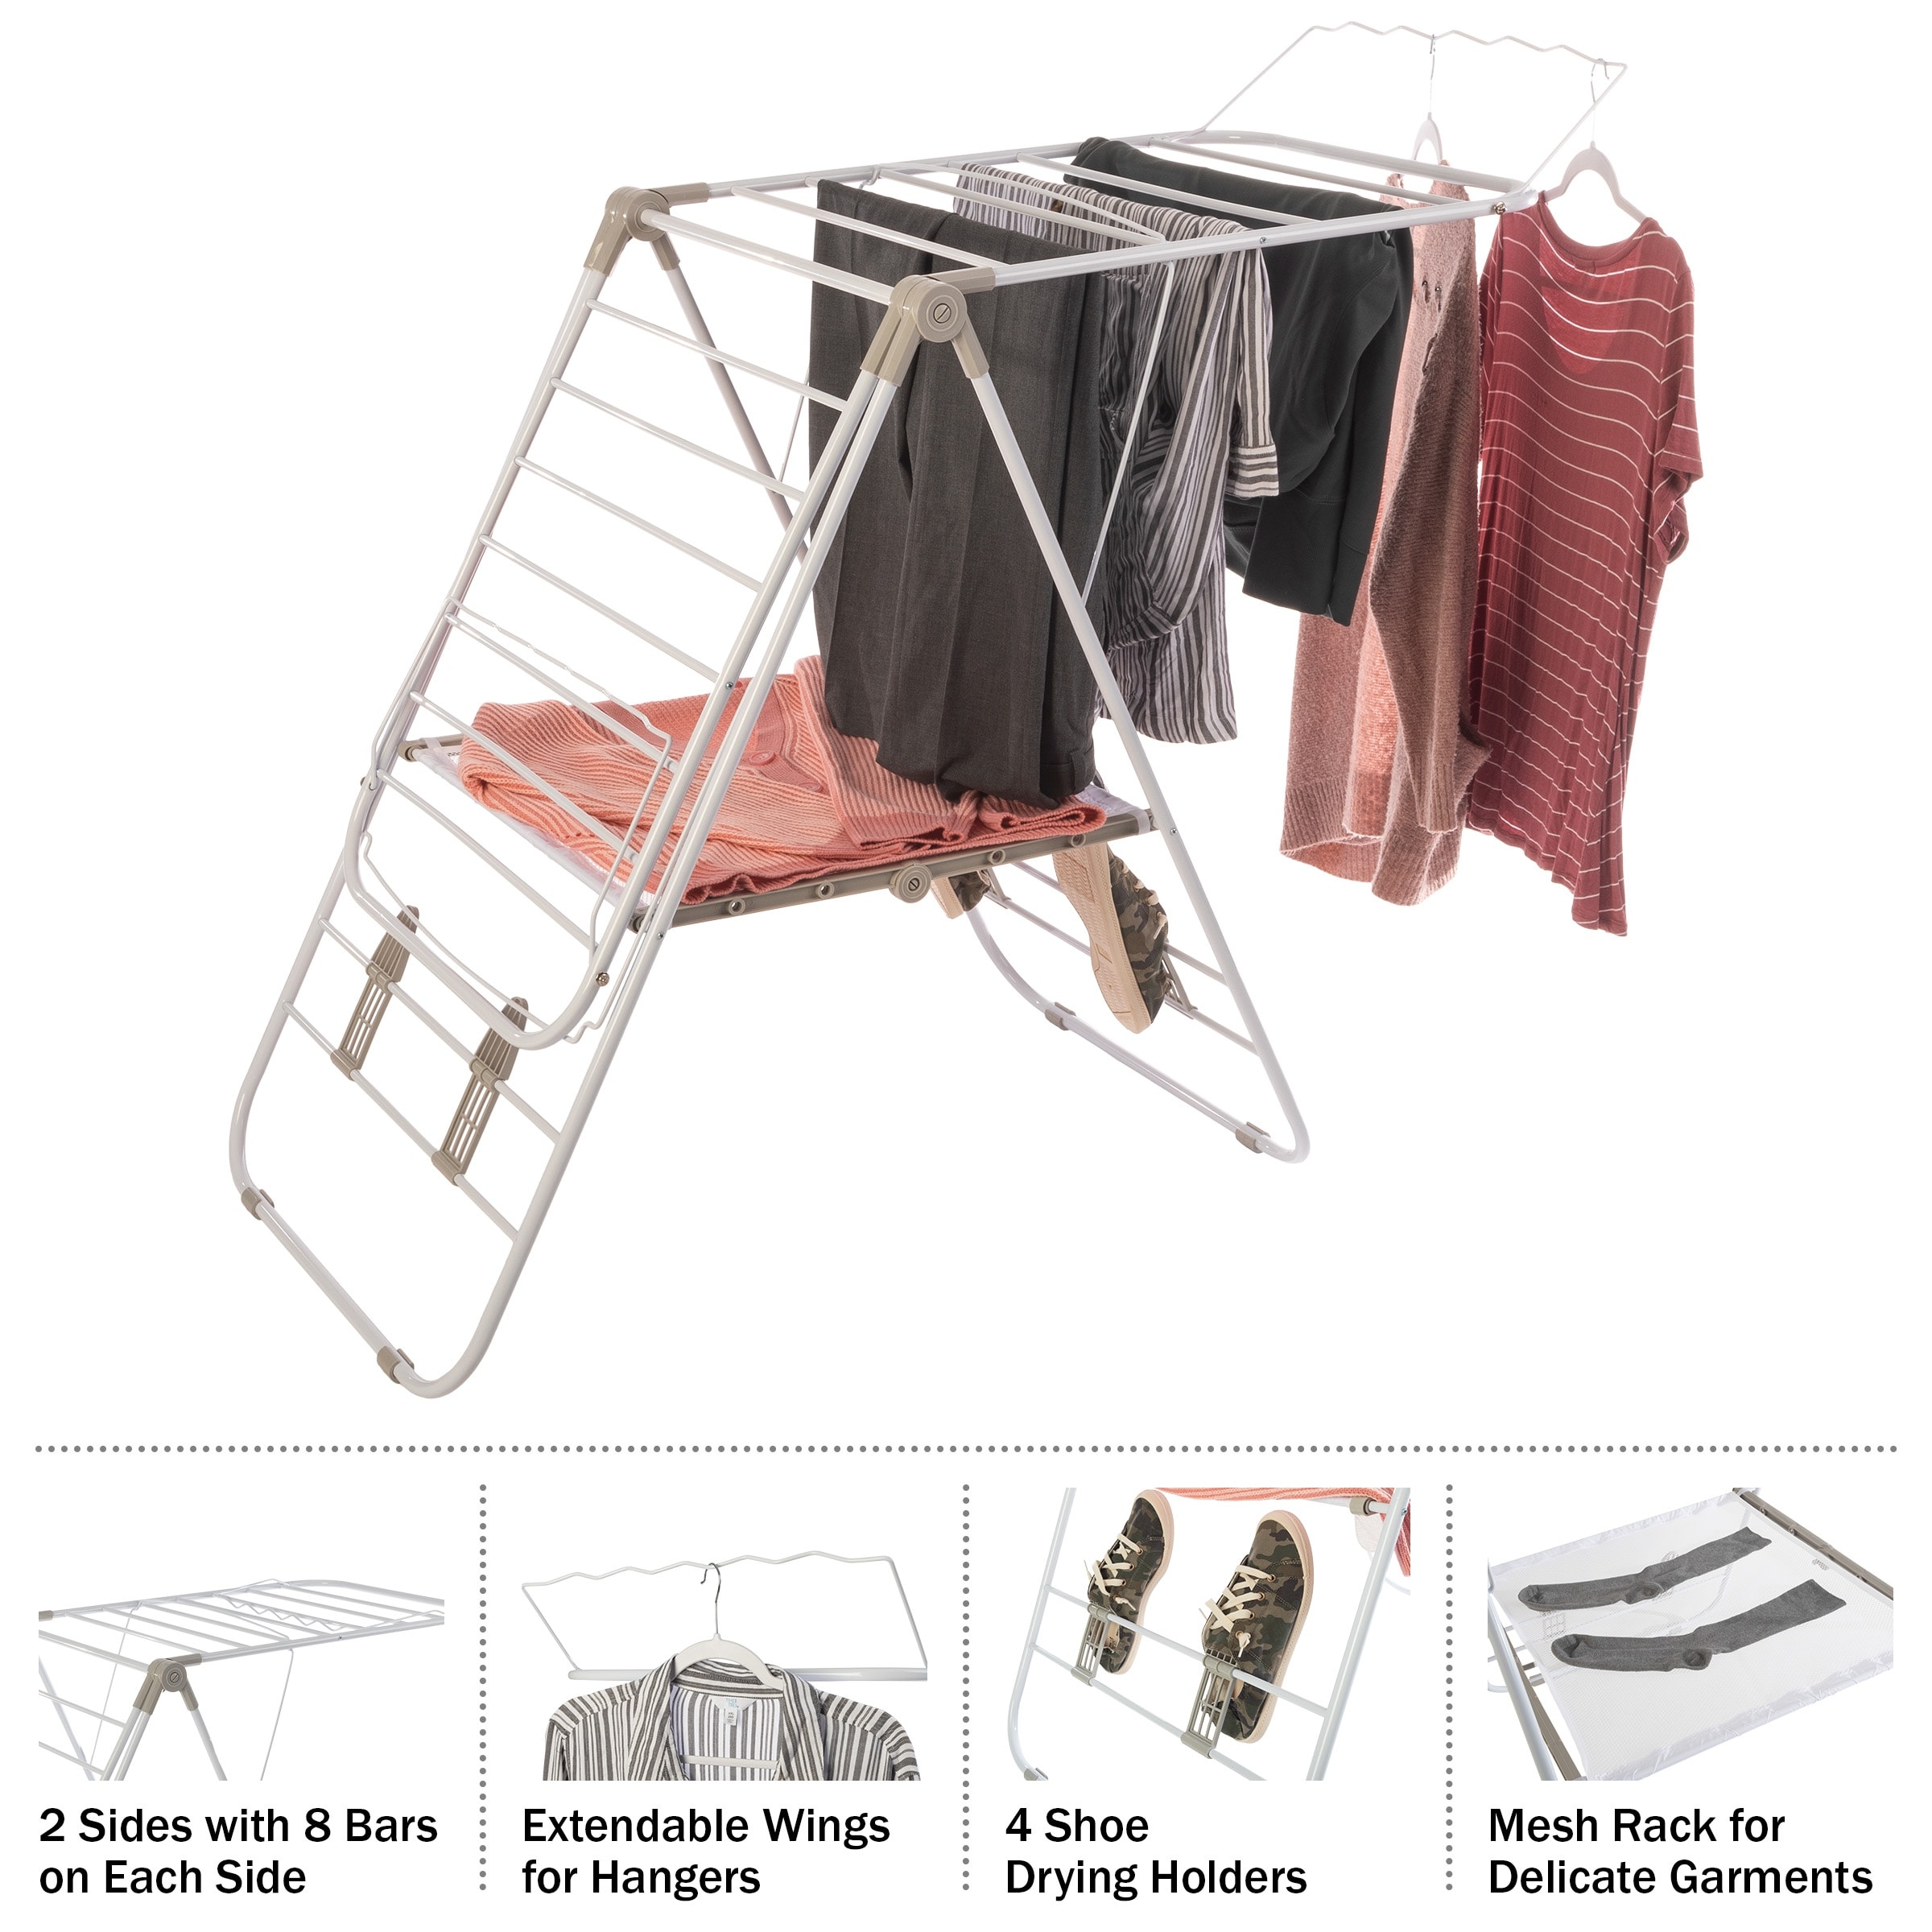 https://ak1.ostkcdn.com/images/products/is/images/direct/940f21468ac8b3d536172124a97cef4f8d5ecf18/Clothes-Drying-Rack---Indoor-Outdoor-Portable-Laundry-Rack---Collapsible-Clothes-Stand-by-Everyday-Home-%28White%29.jpg